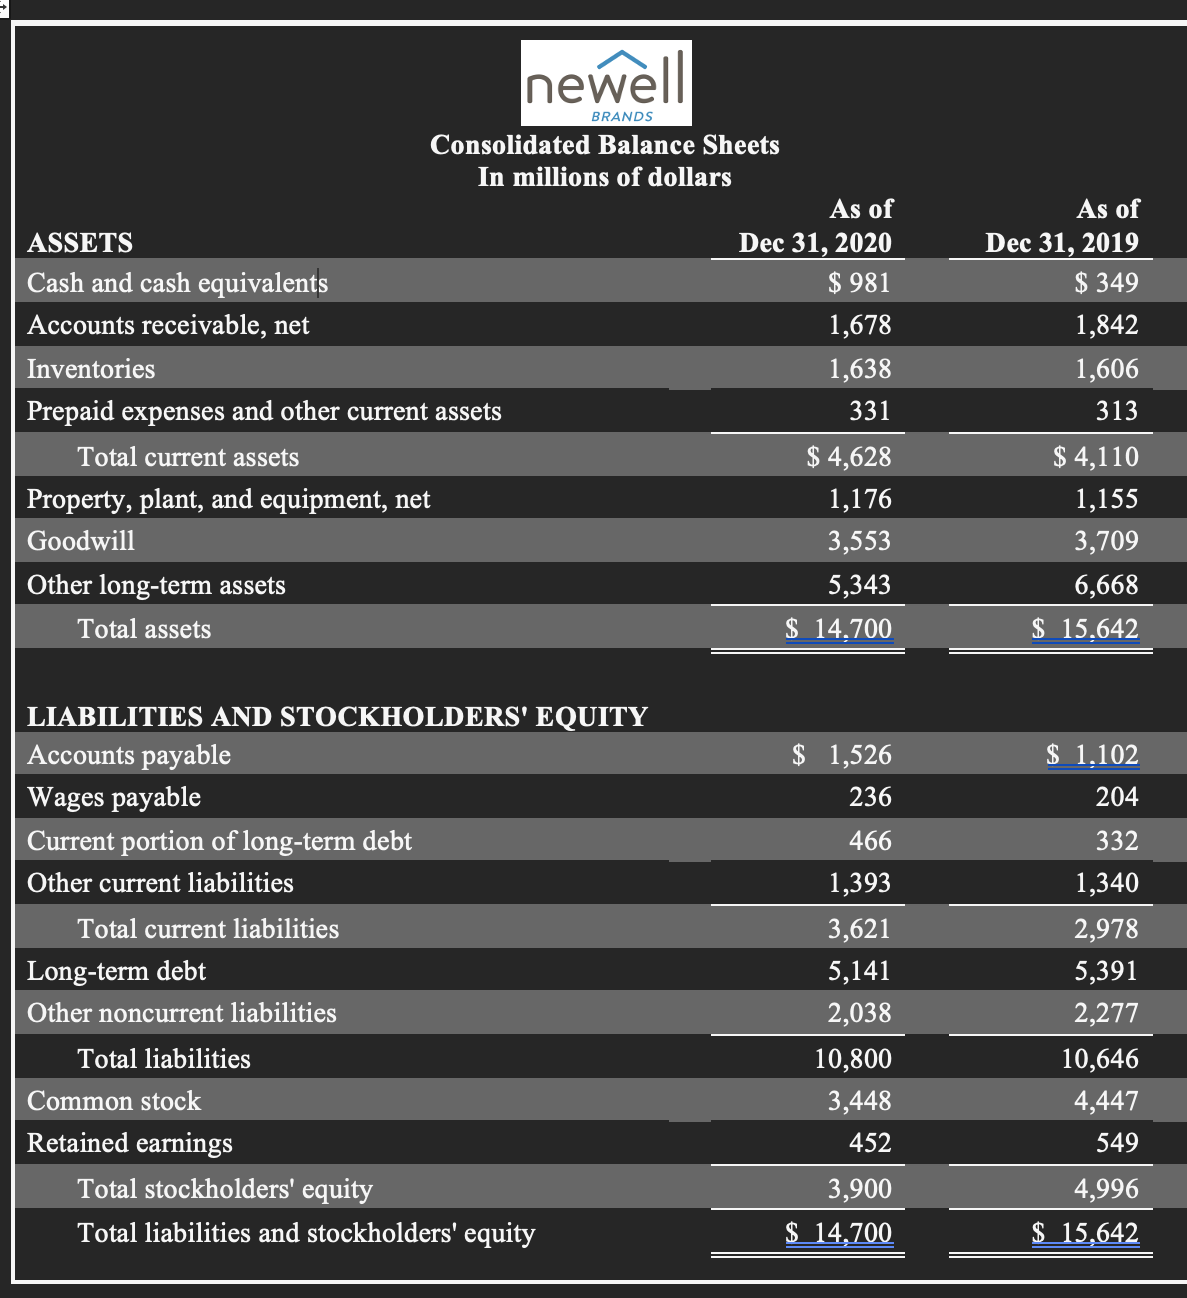 newell
BRANDS
Consolidated Balance Sheets
In millions of dollars
As of
As of
ASSETS
Dec 31, 2020
Dec 31, 2019
Cash and cash equivalents
$ 981
$ 349
Accounts receivable, net
1,678
1,842
Inventories
1,638
1,606
Prepaid expenses and other current assets
331
313
Total current assets
$ 4,628
$ 4,110
Property, plant, and equipment, net
1,176
1,155
Goodwill
3,553
3,709
Other long-term assets
5,343
6,668
Total assets
$ 14,700
$ 15,642
LIABILITIES AND STOCKHOLDERS' EQUITY
Accounts payable
$ 1,526
$ 1,102
Wages payable
236
204
Current portion of long-term debt
466
332
Other current liabilities
1,393
1,340
Total current liabilities
3,621
2,978
Long-term debt
5,141
5,391
Other noncurrent liabilities
2,038
2,277
Total liabilities
10,800
10,646
Common stock
3,448
4,447
Retained earnings
452
549
Total stockholders' equity
3,900
4,996
Total liabilities and stockholders' equity
$ 14,700
$ 15,642
